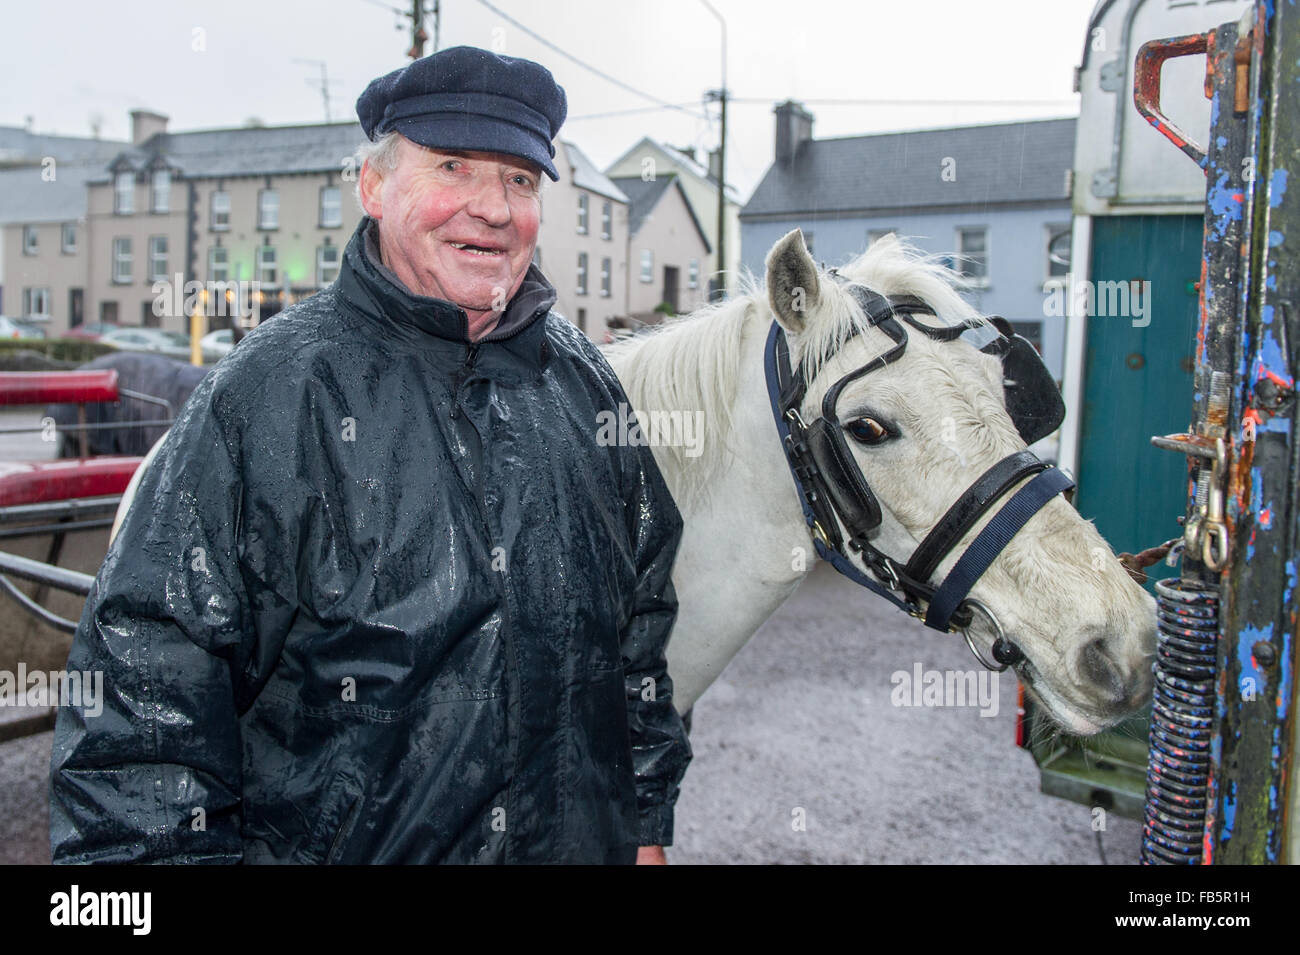 Drimoleague, Ireland. 10th January, 2016. John O'Mahony from Church Cross is pictured with his horse, Misty after the Drimoleague to Drinagh Cheval. The Cheval was held to raise funds for COPE Foundation. Credit: Andy Gibson/Alamy Live News Stock Photo